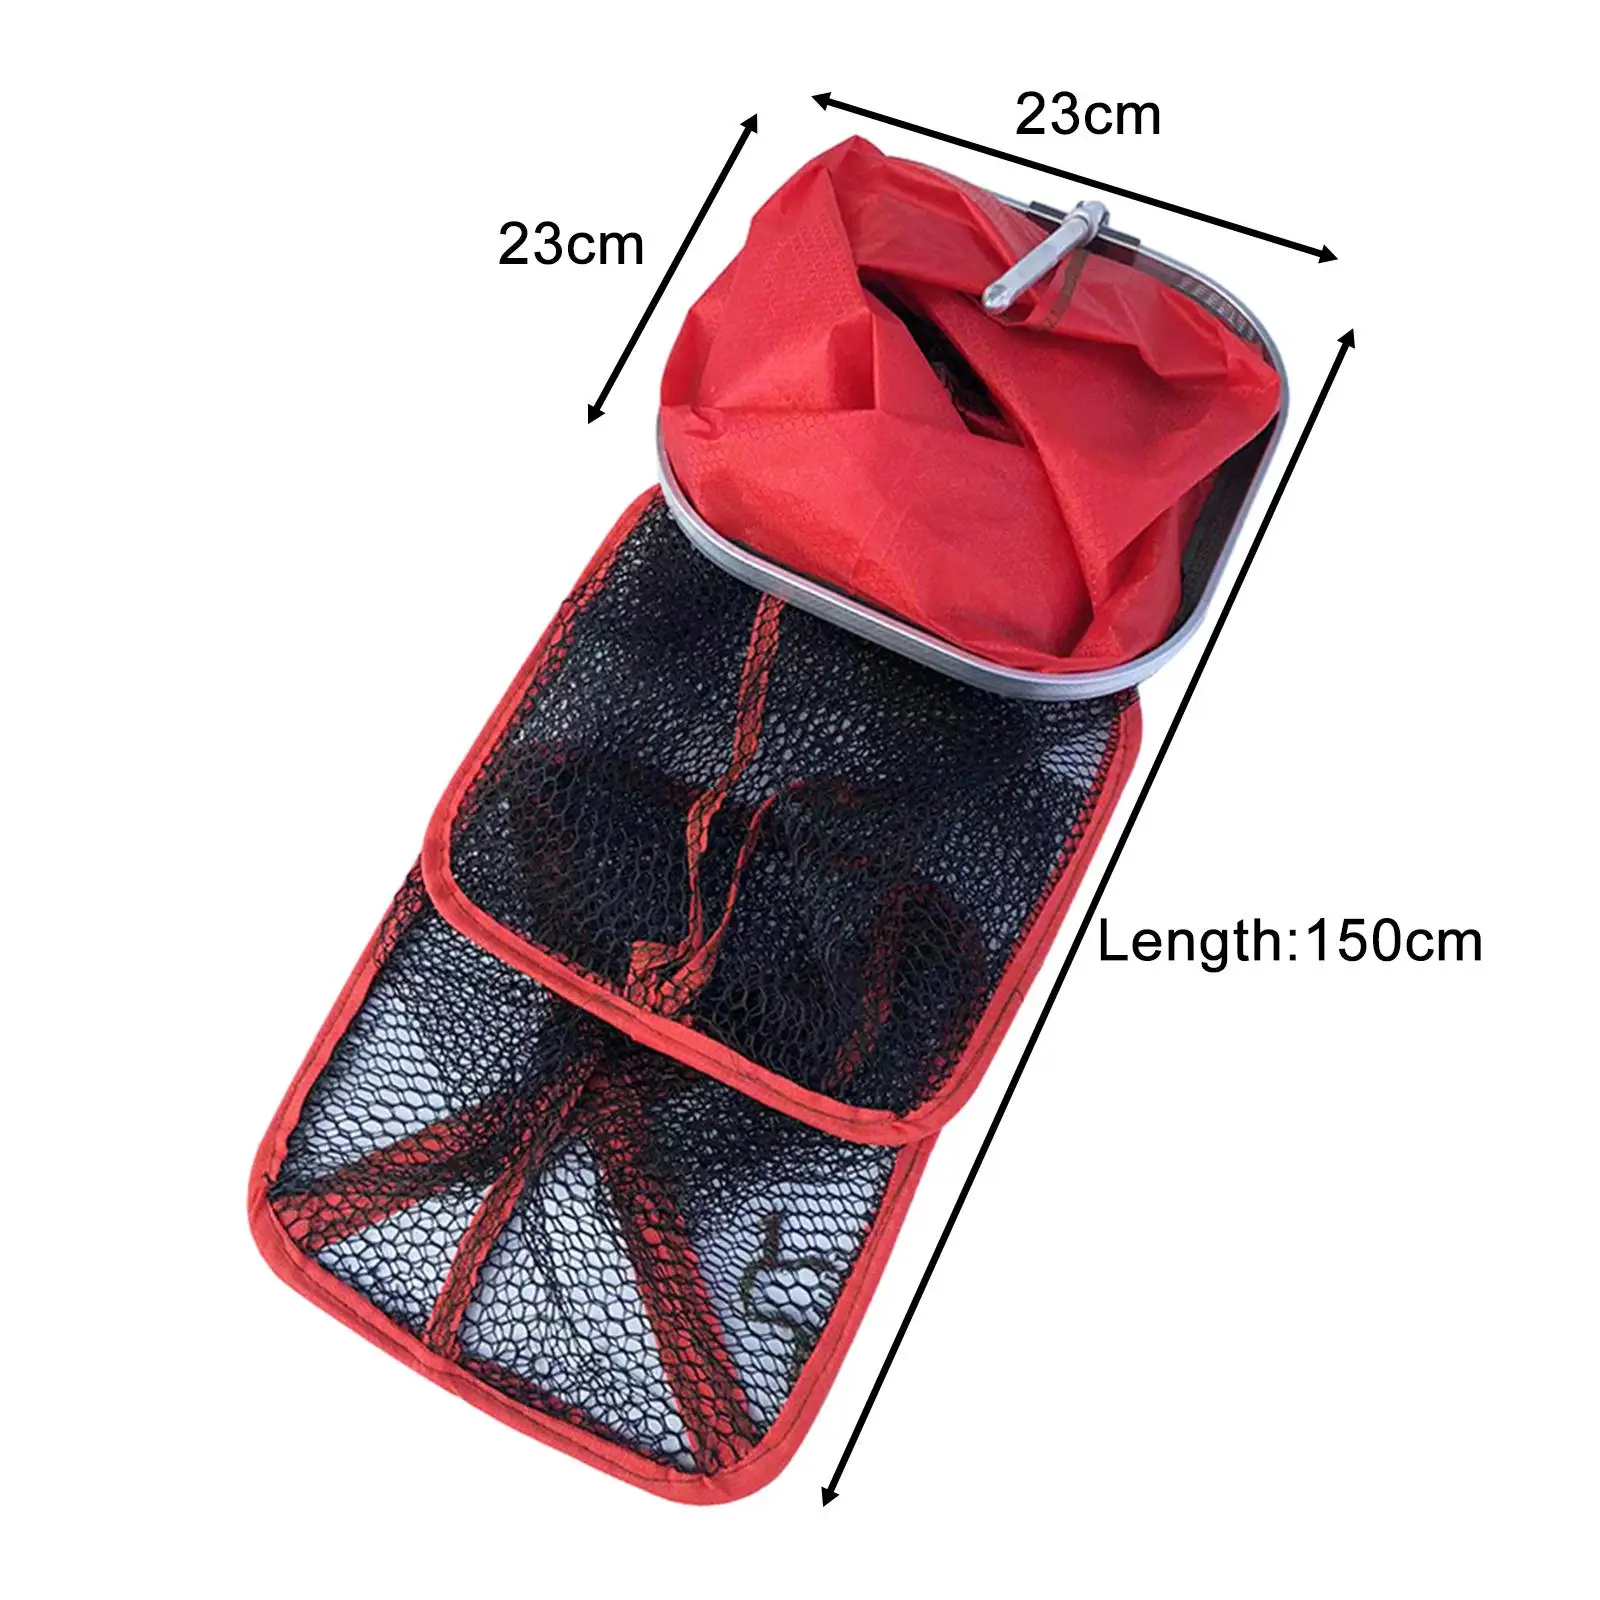 Fishing Net Wear Resistance Durable Easy Carrying Thickened Woven Fish Basket